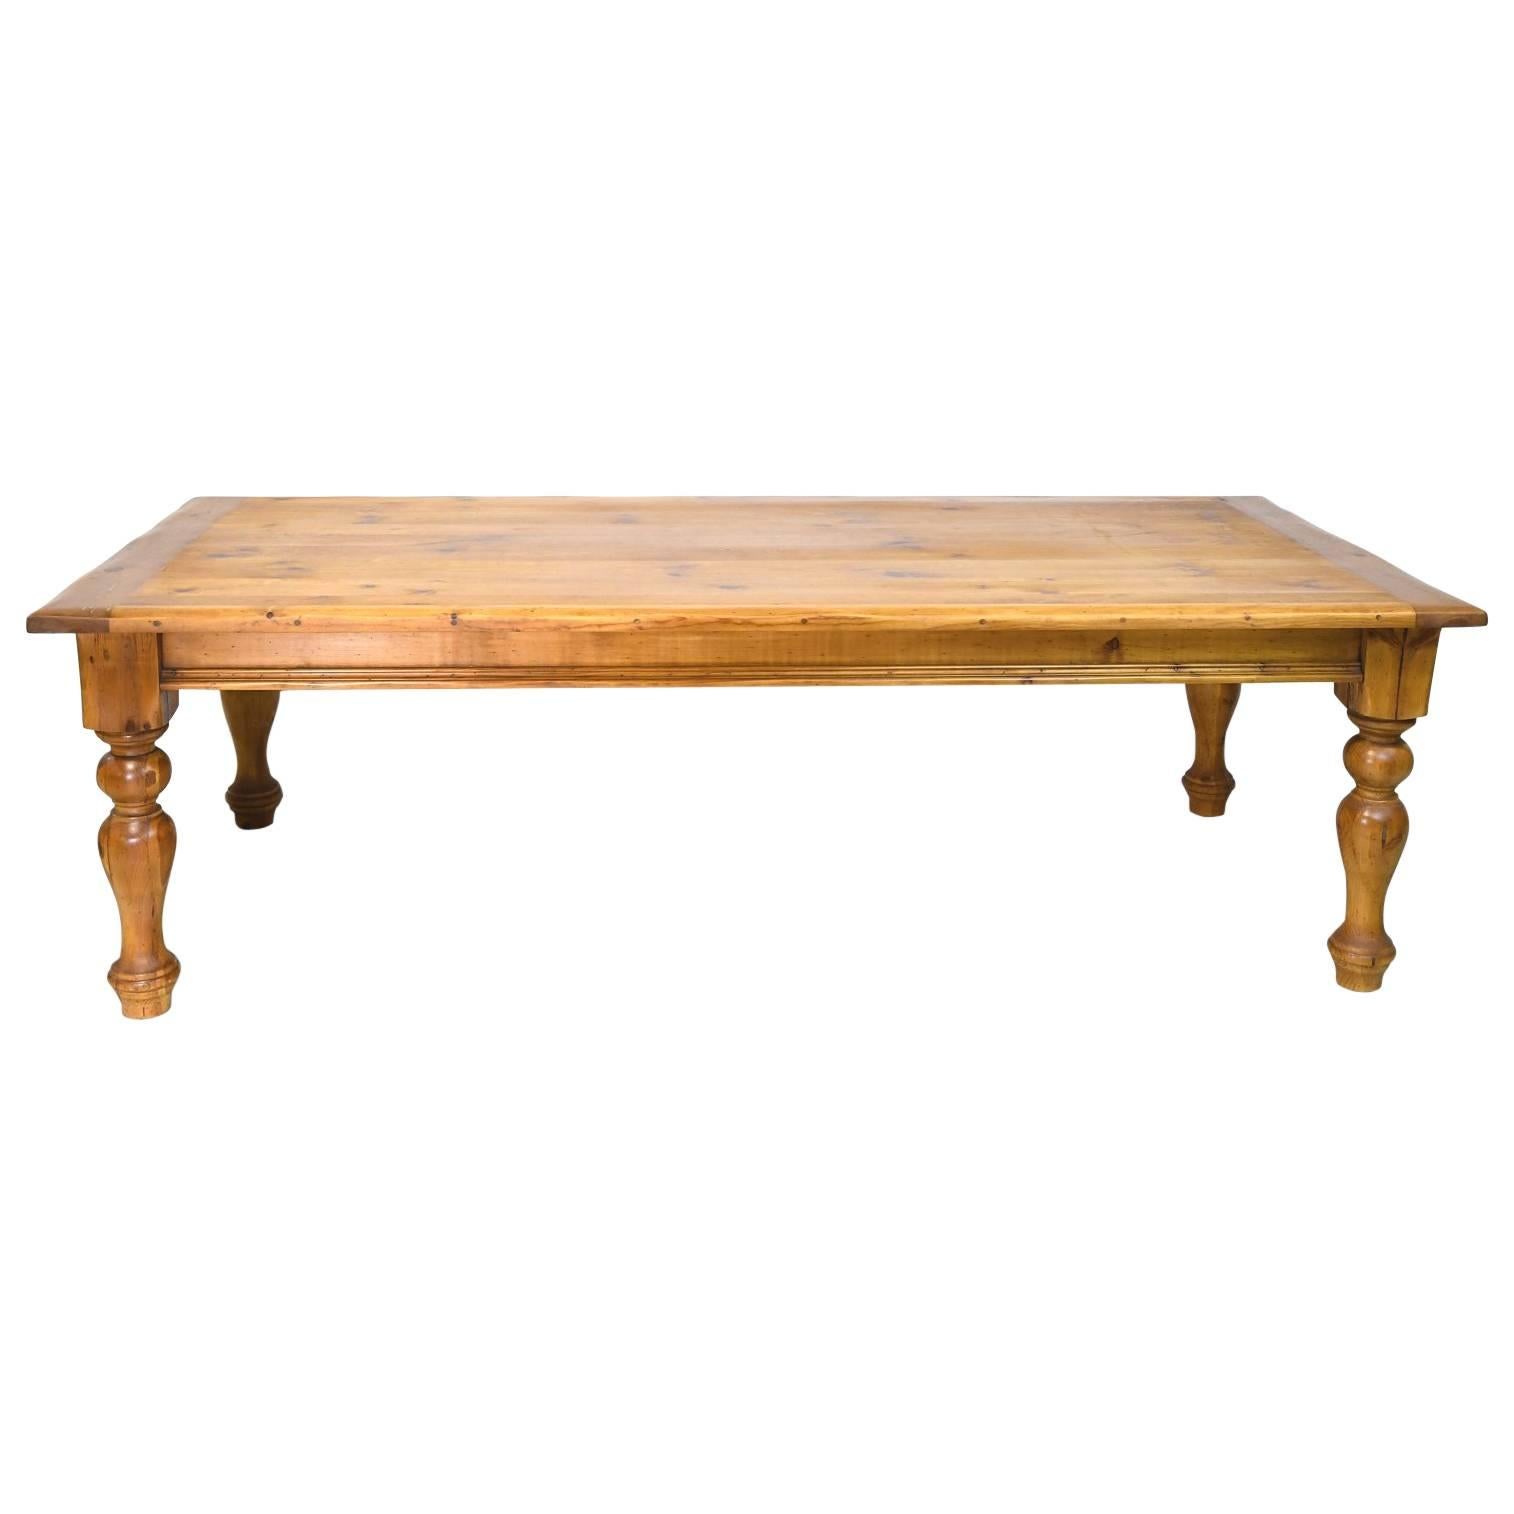 A long European style farmhouse dining table in pine with plank-top and handsome turned legs. Beautifully finished in a natural hand-rubbed oil finish. England, circa 1990s.
Note: Top has two coats of an organic LEED certified catalyzed oil finish